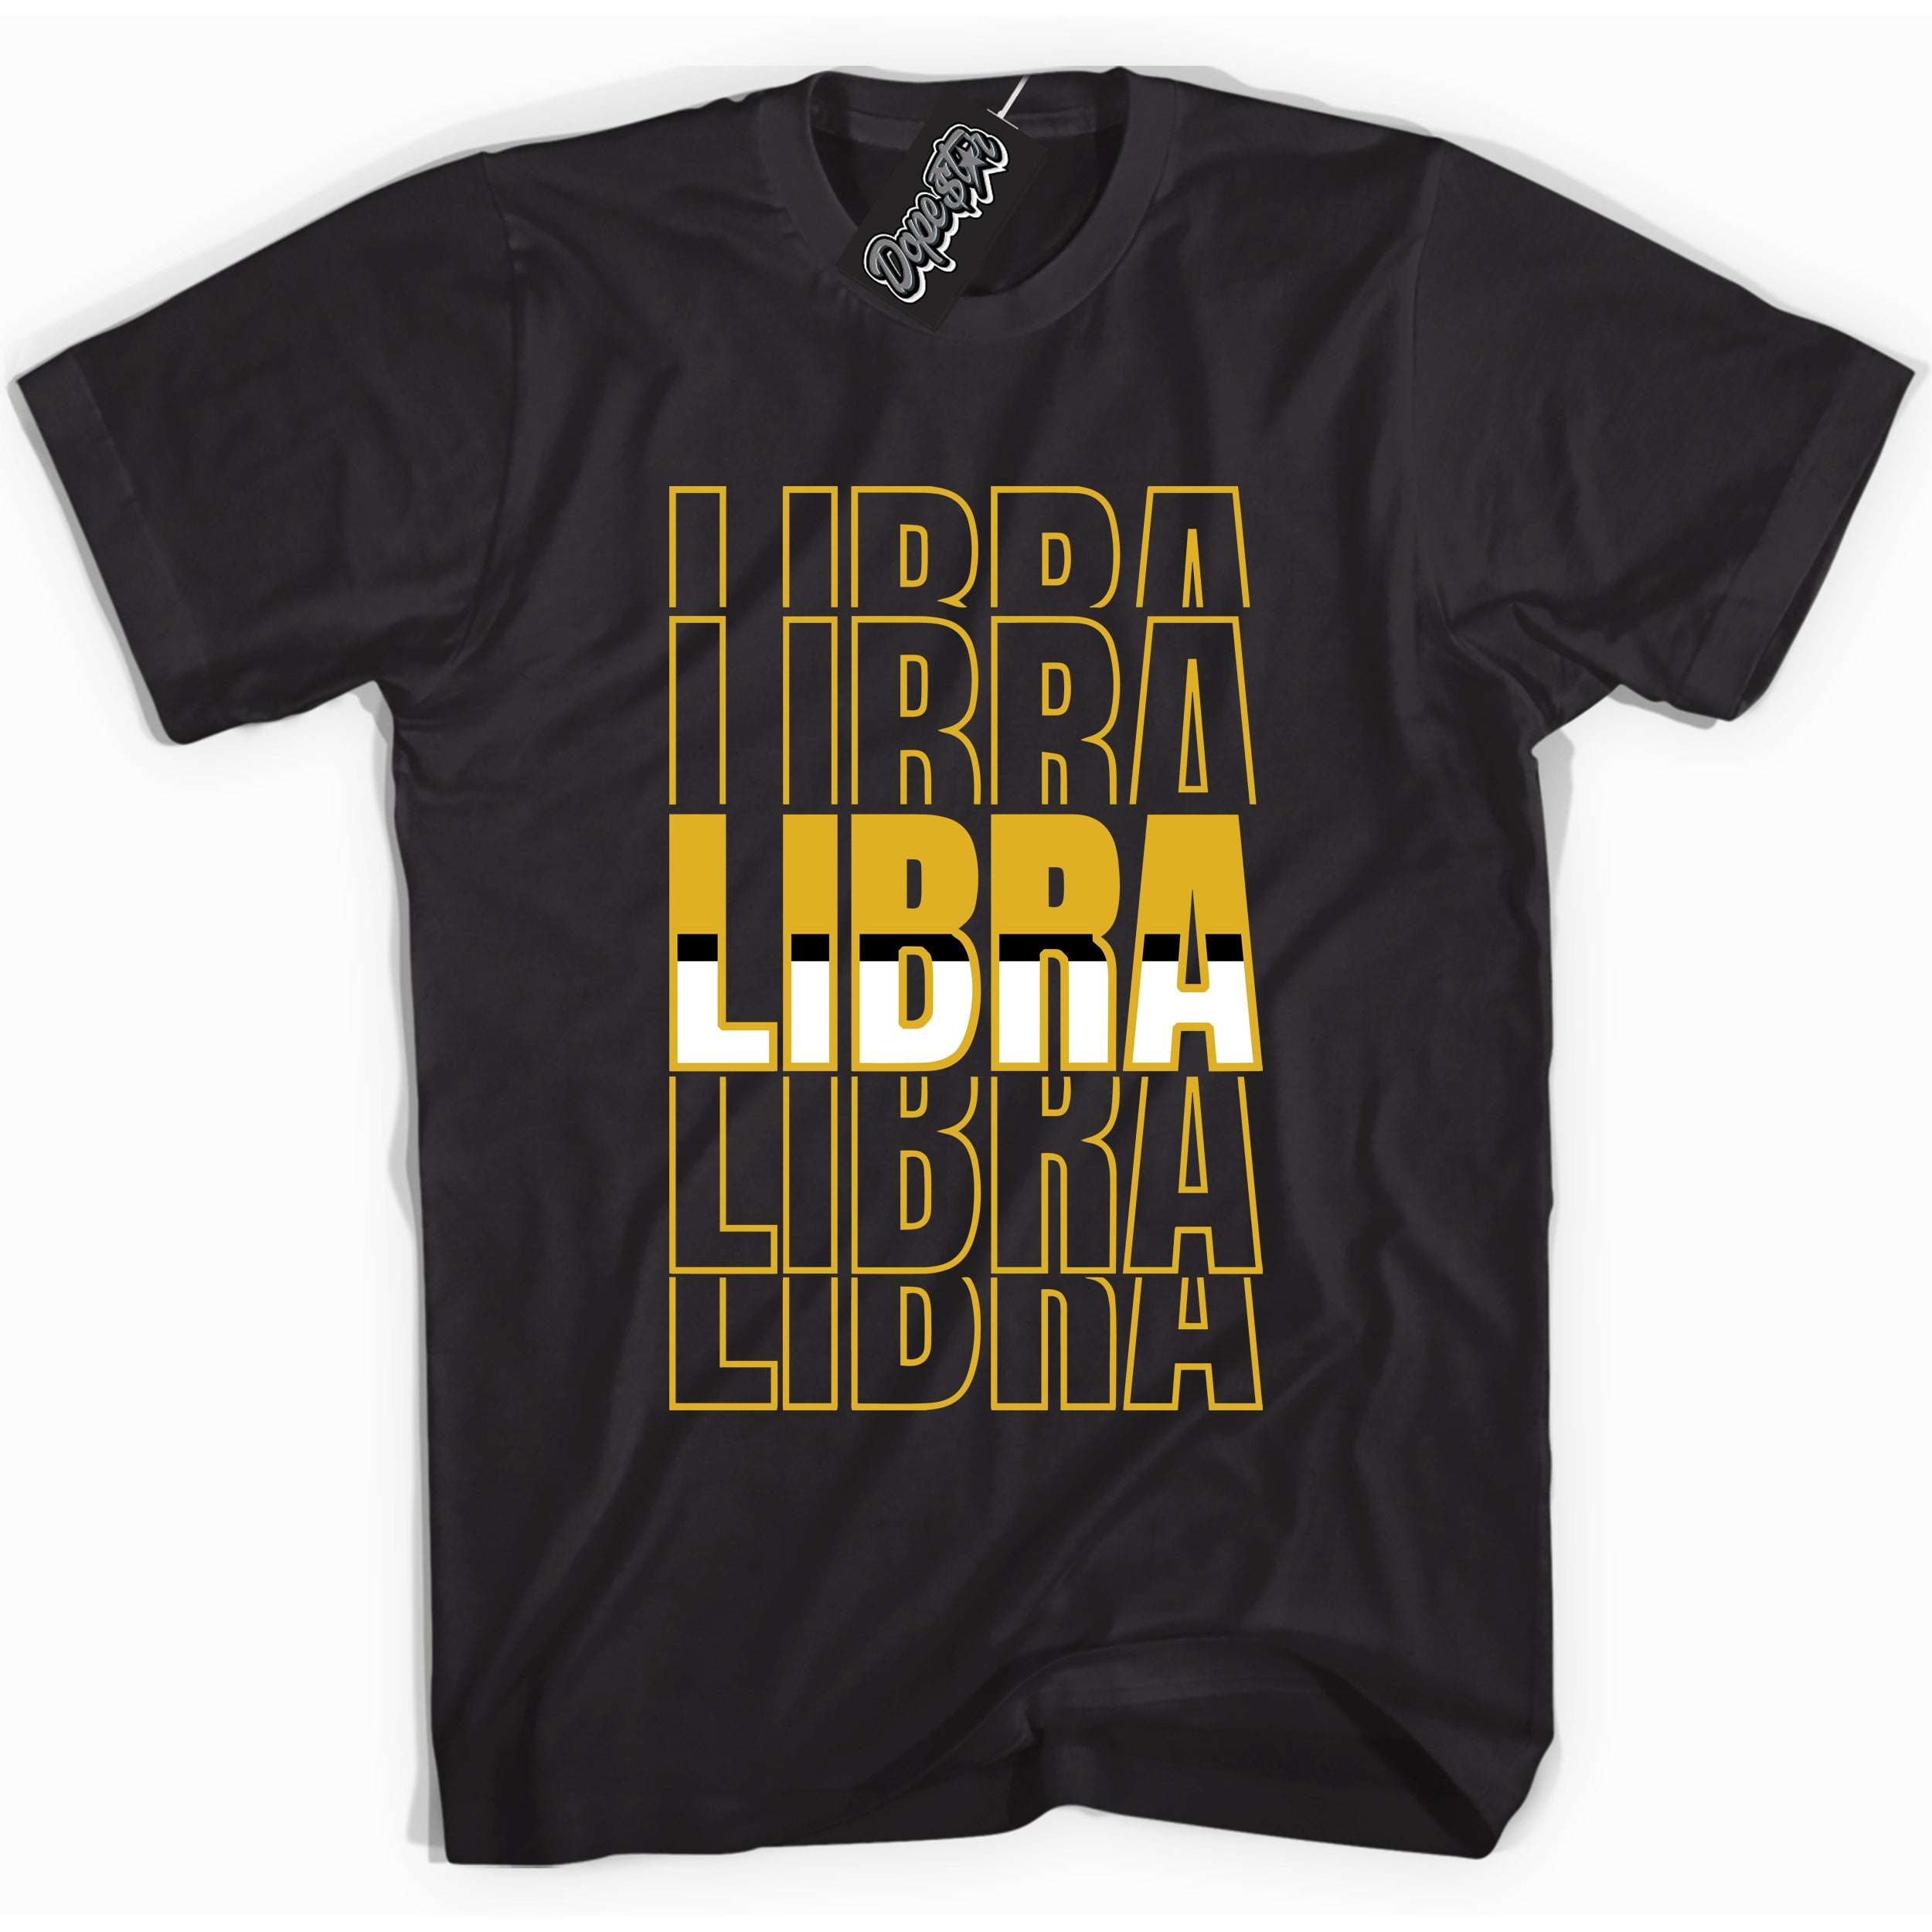 Cool Black Shirt With Libra design That Perfectly Matches YELLOW OCHRE 6s Sneakers.